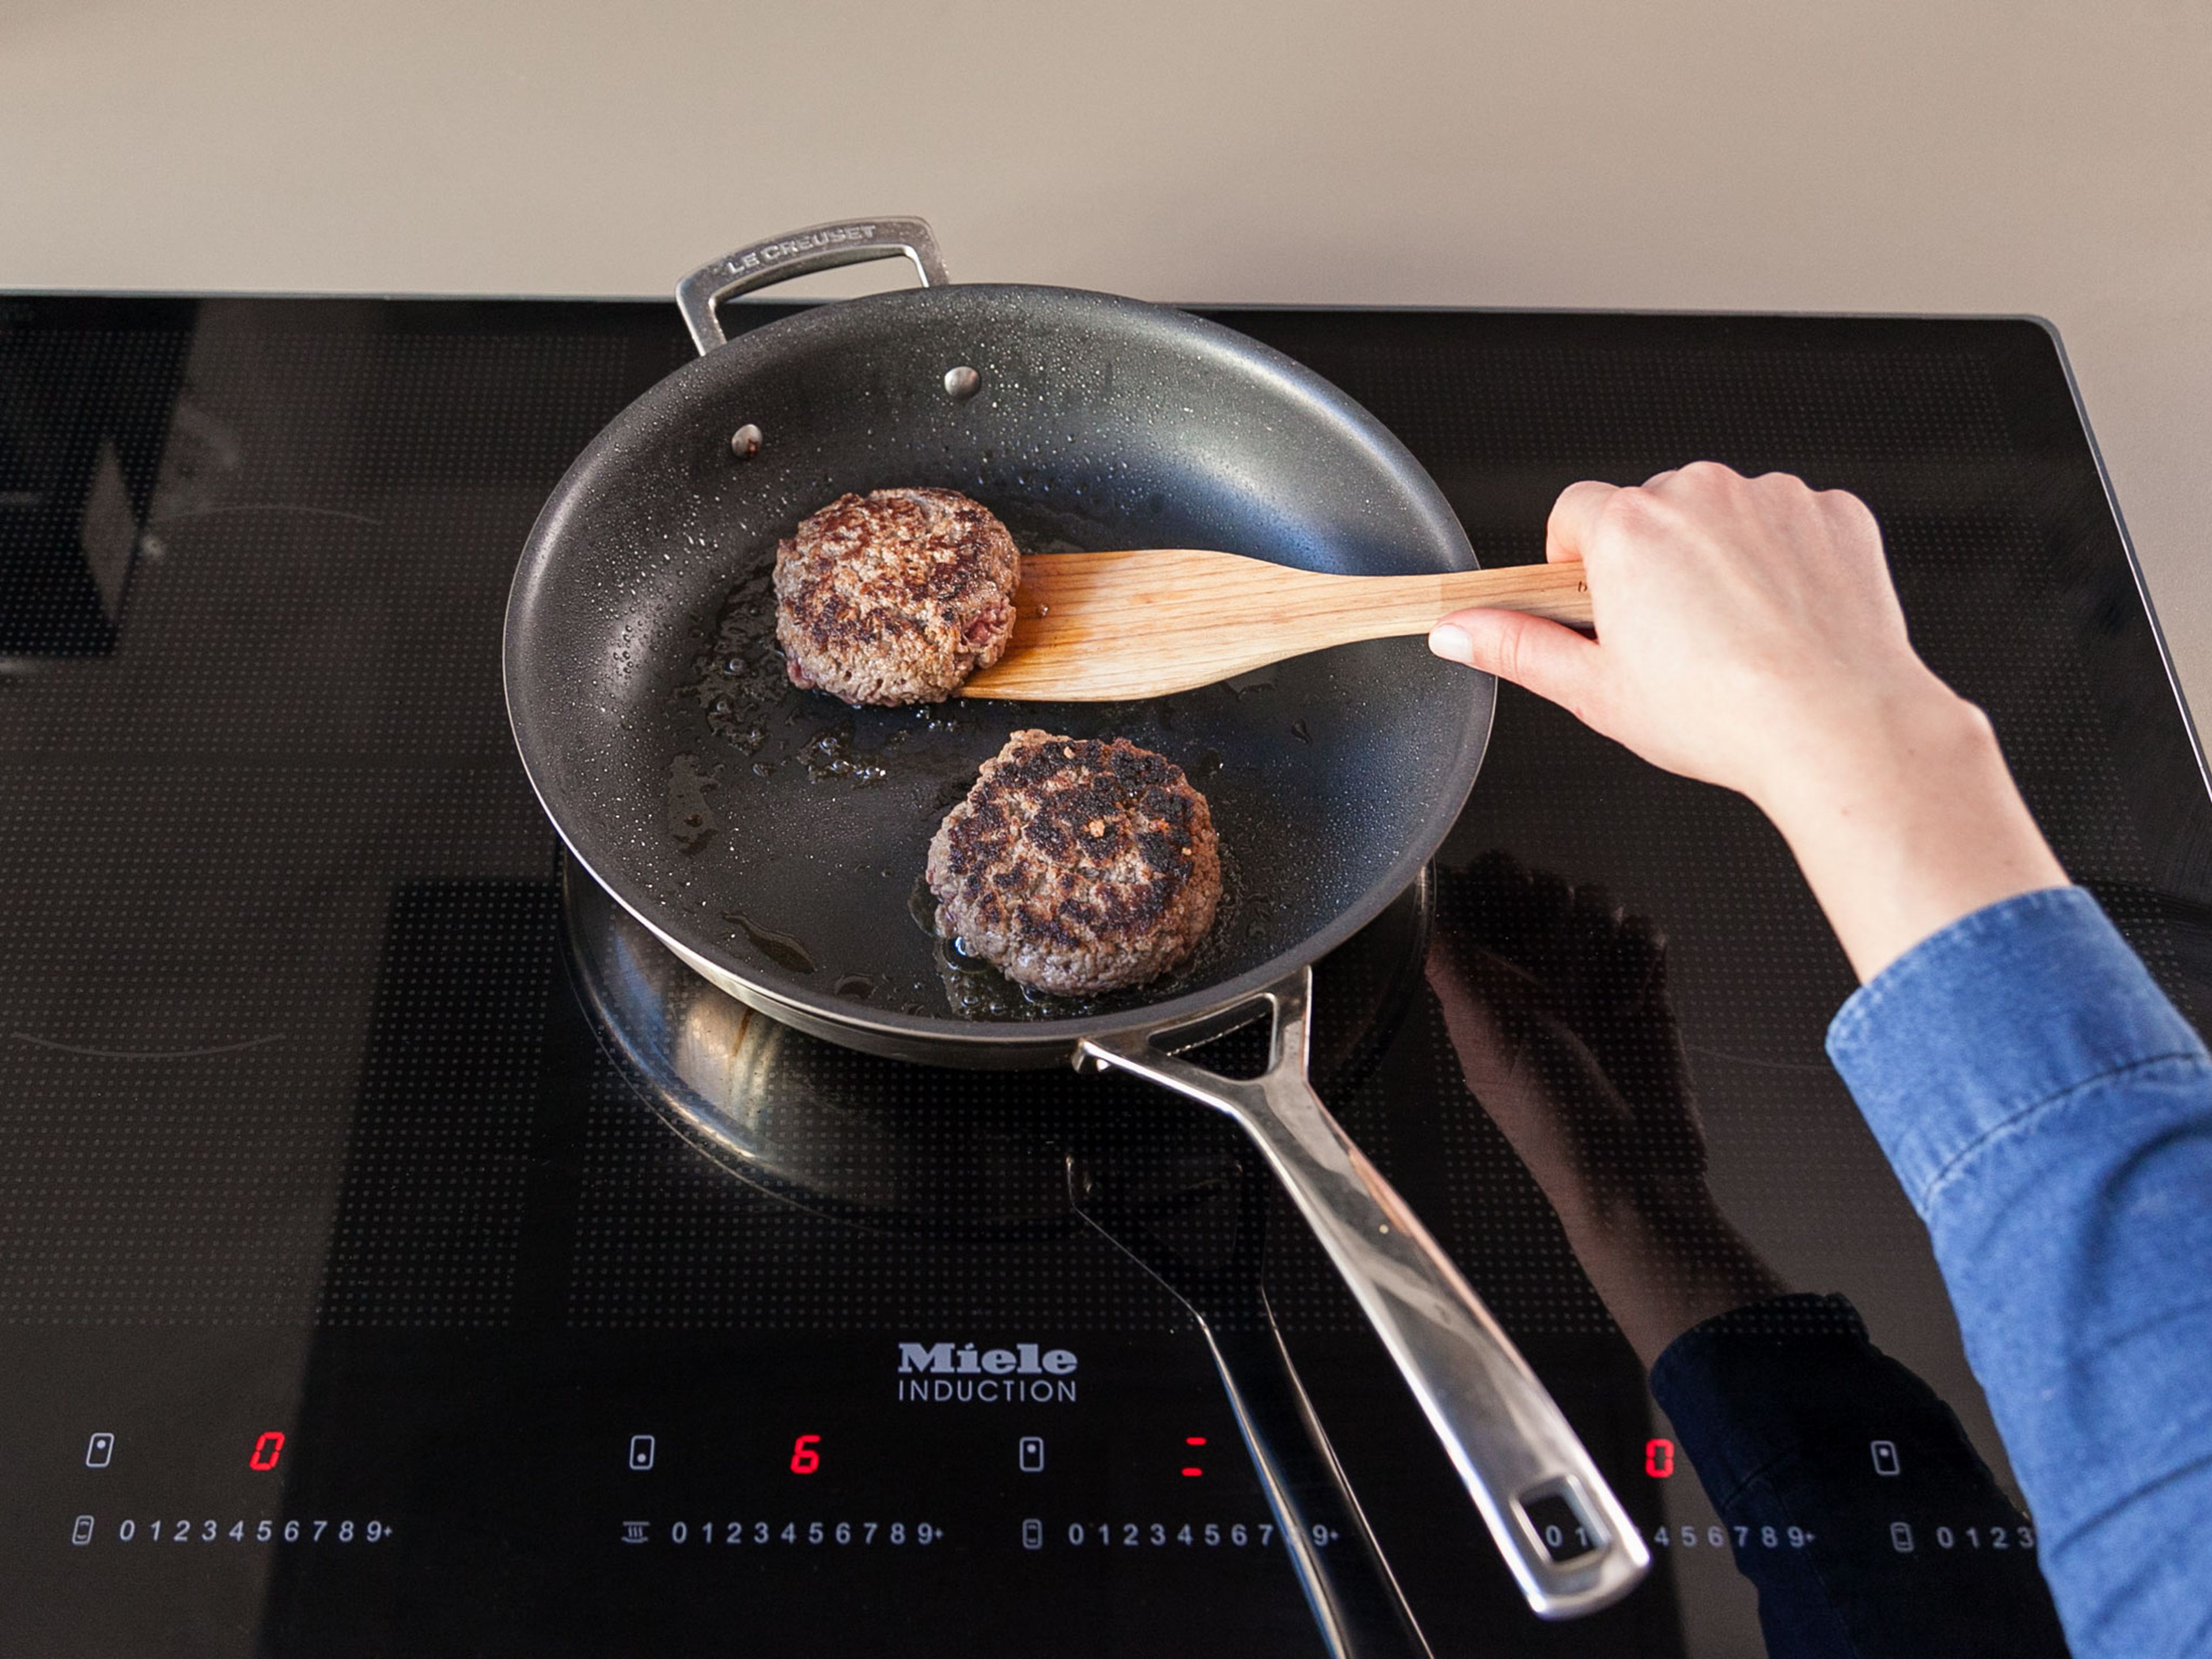 Heat oil in a pan for approx. 2 min. and fry burger patties on both sides over medium-high heat for approx. 4 min., or until cooked to desired doneness.